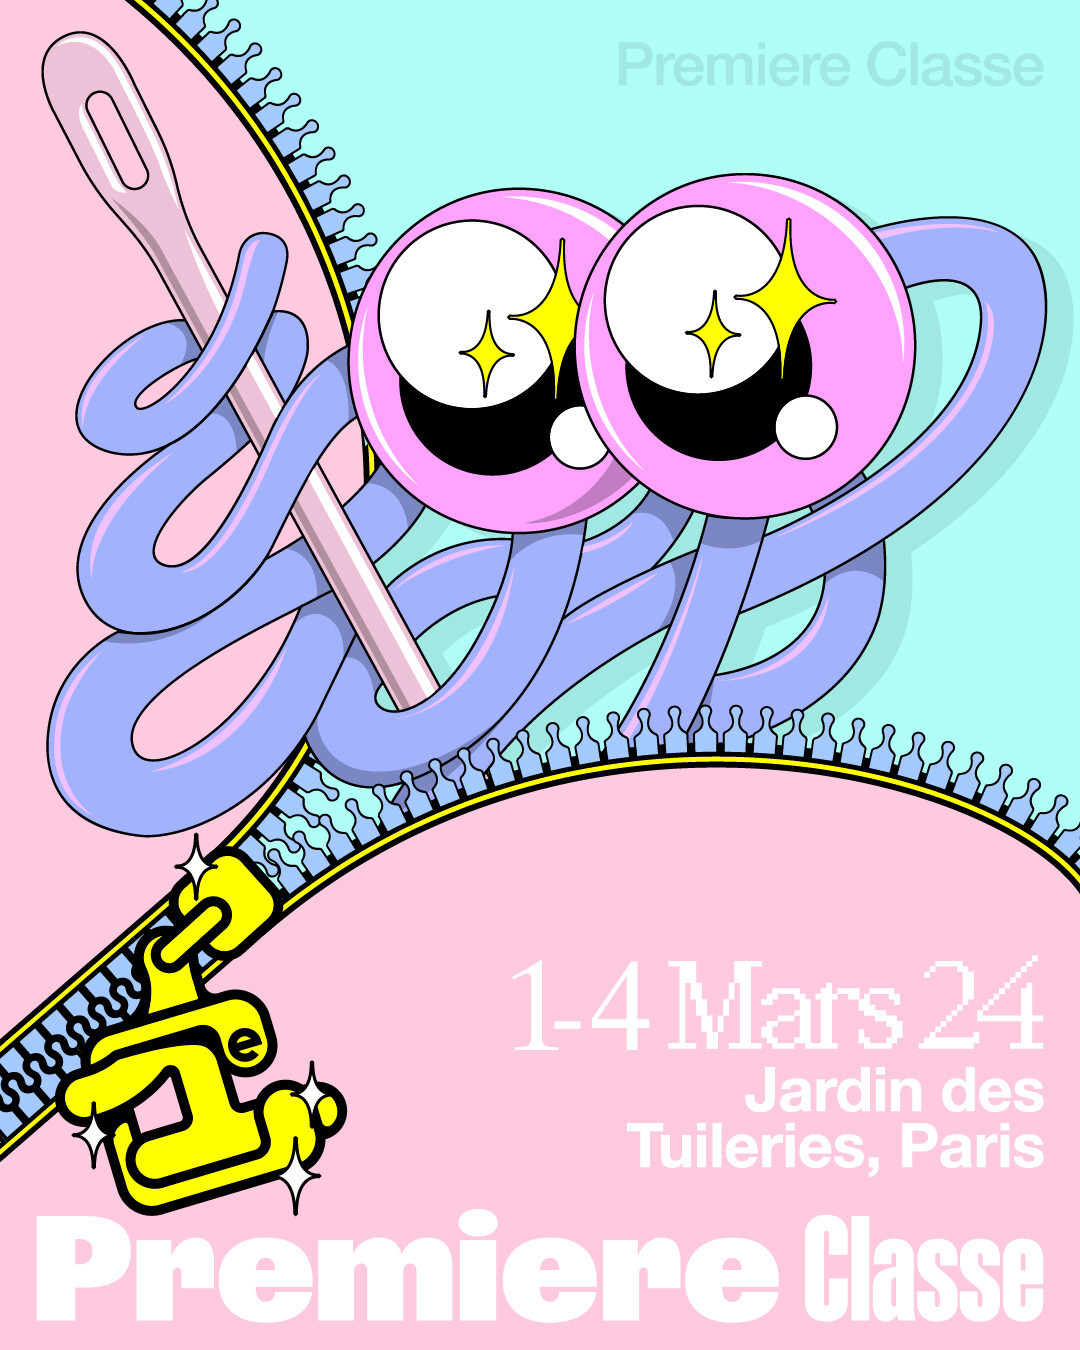 From March 1st to 4th, Premiere Classe reveals a colorful universe with its cartoonish mascot to welcome you to its mythical tents in the Jardin des Tuileries.
Conceived by the Parisian 'trans design' studio Zyva and the creative direction of Golgotha, Premiere Classe invites you to gravitate into an immersive pop and playful environment, a mini-city punctuated by totem characters, all united to celebrate its 35th year 👀